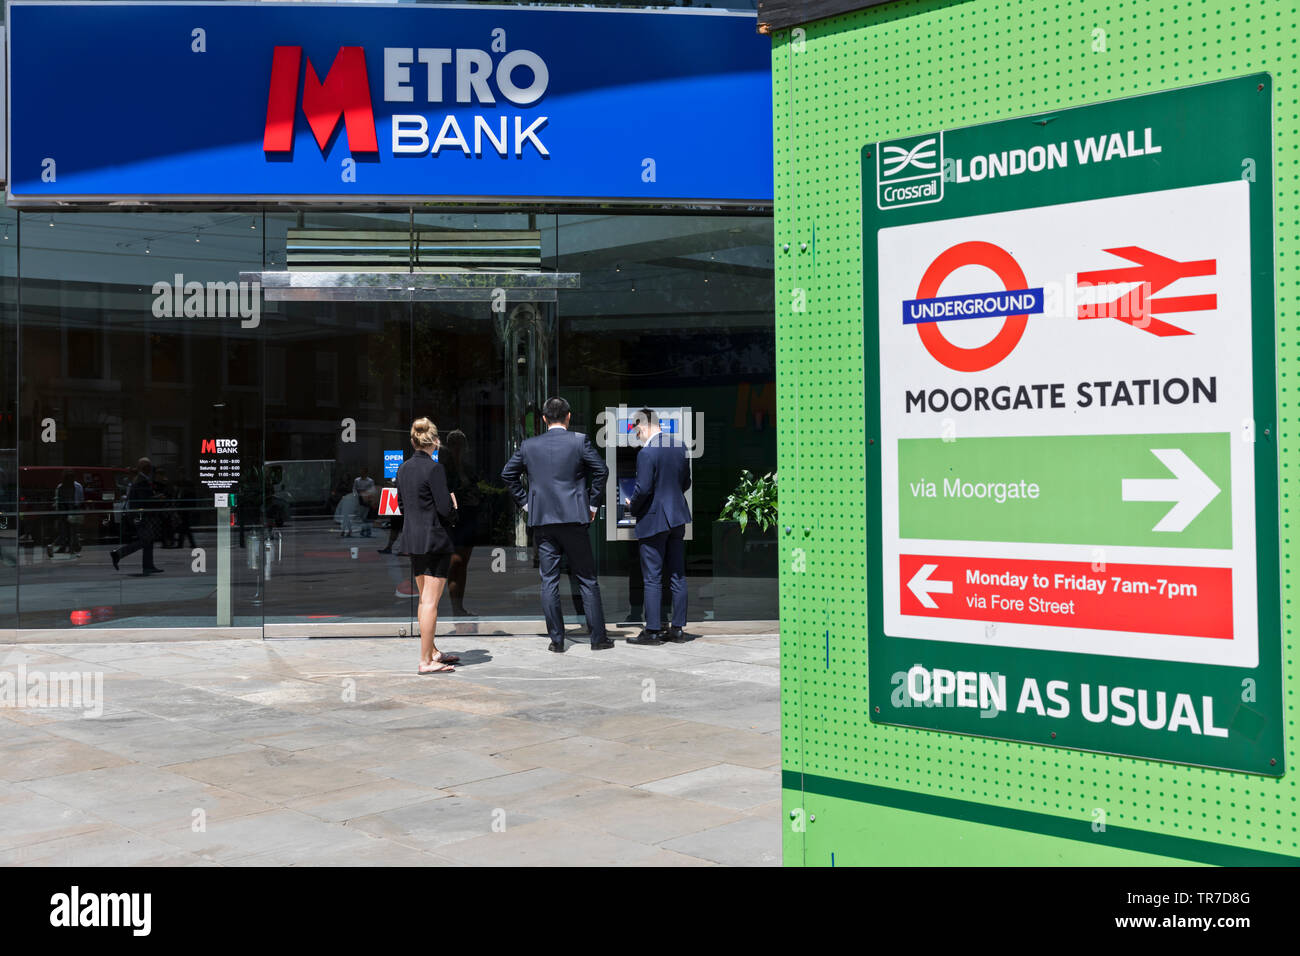 Customers outside a branch of Metro Bank in Moorgate, London, UK. Founded in 2010, shares in the bank have recently hit record lows. Stock Photo